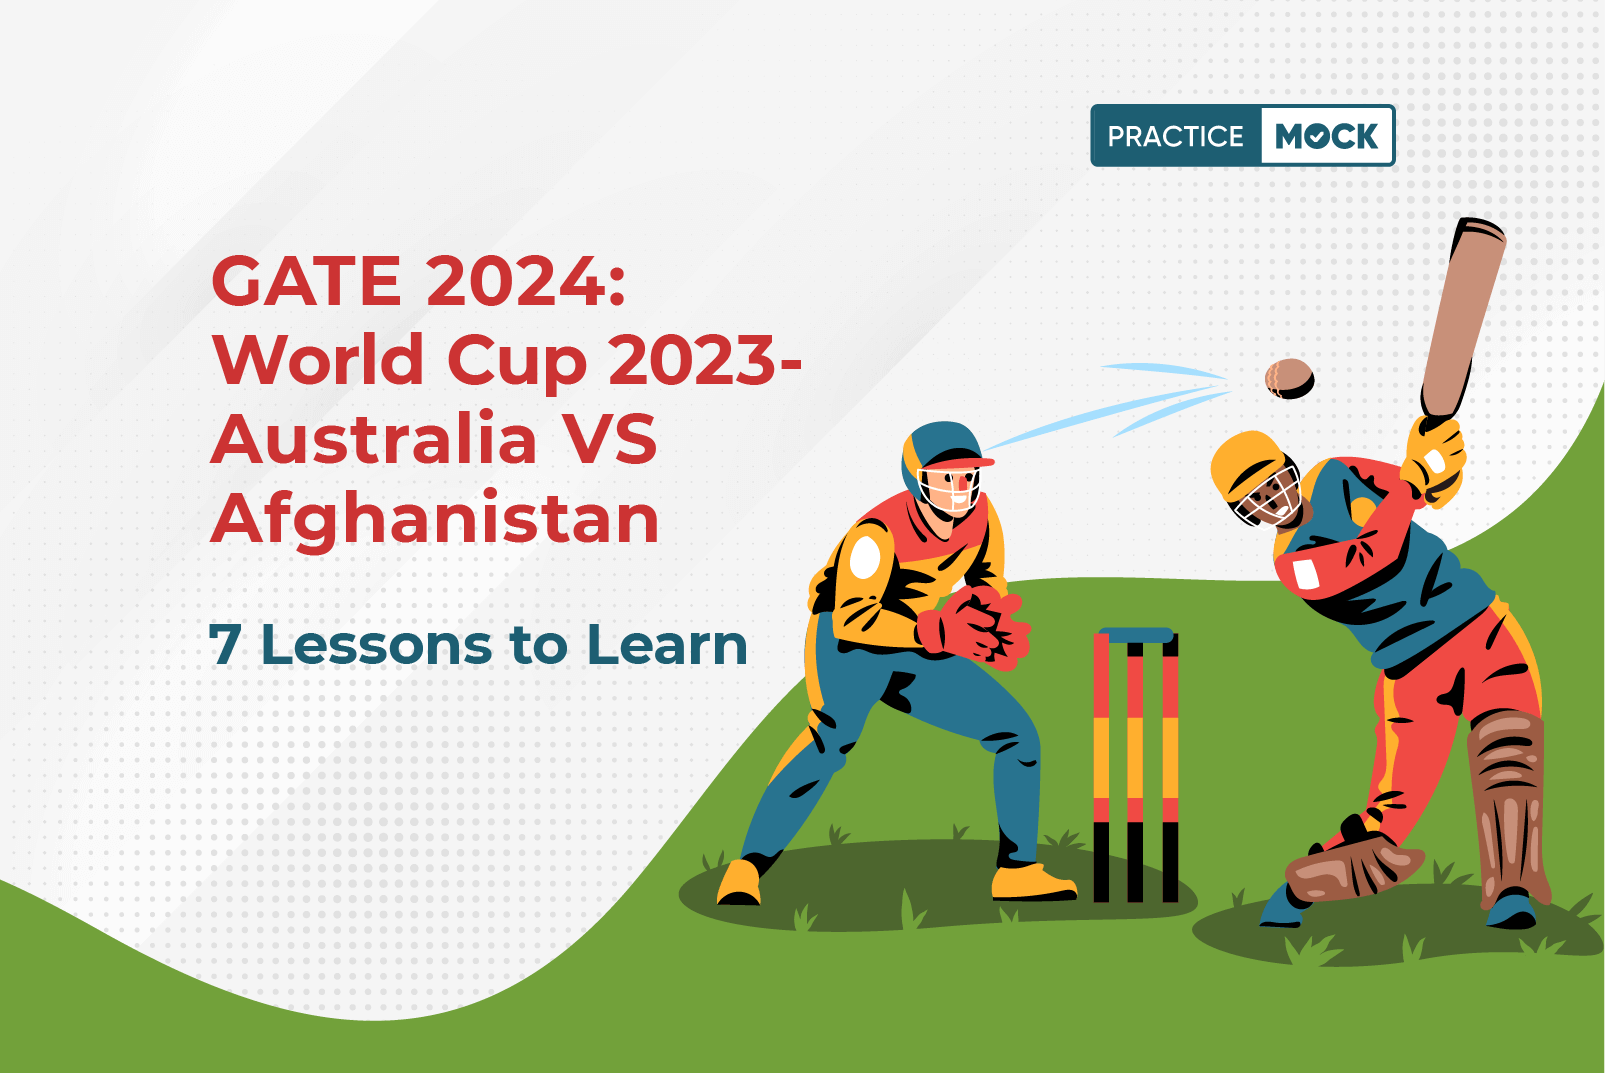 GATE 2024 & Glenn Maxwell's Masterclass: 7 Lessons to Learn from His World Cup 2023 Performance